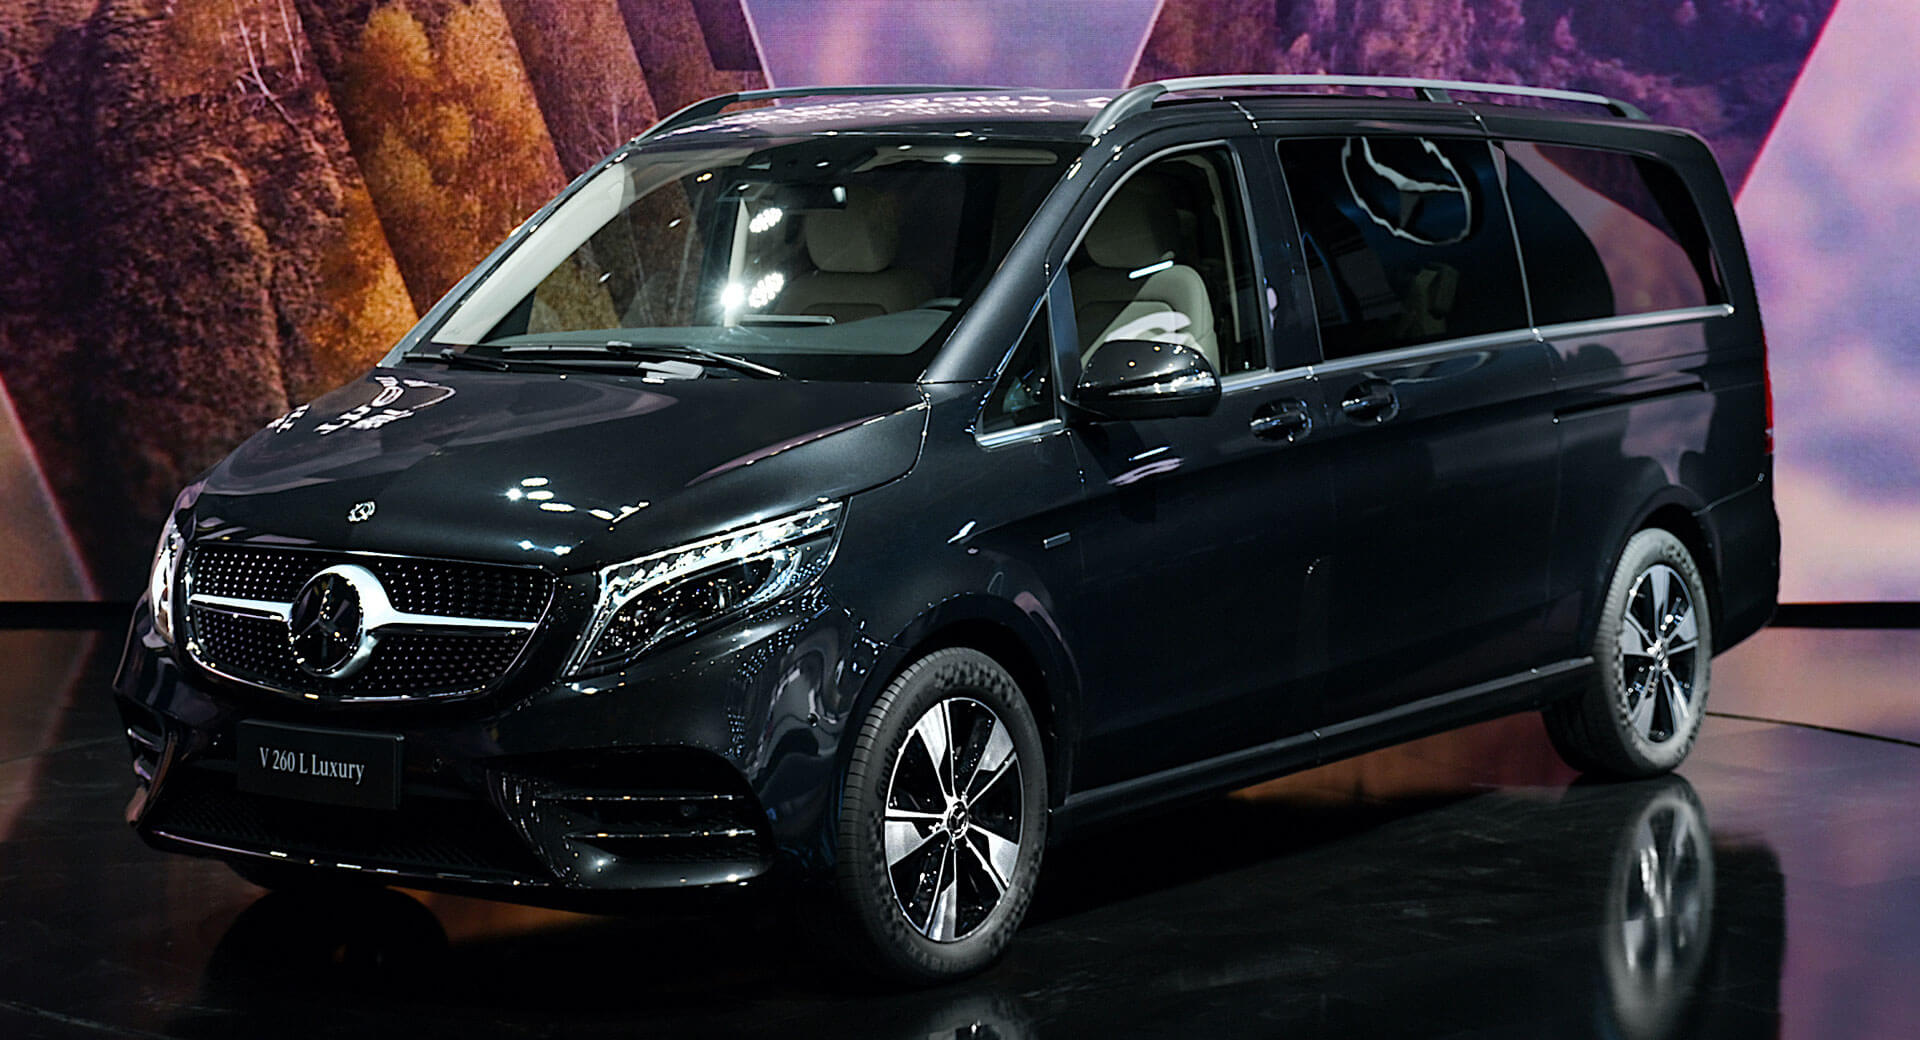 China, This Is Your 2021 MercedesBenz VClass Luxury